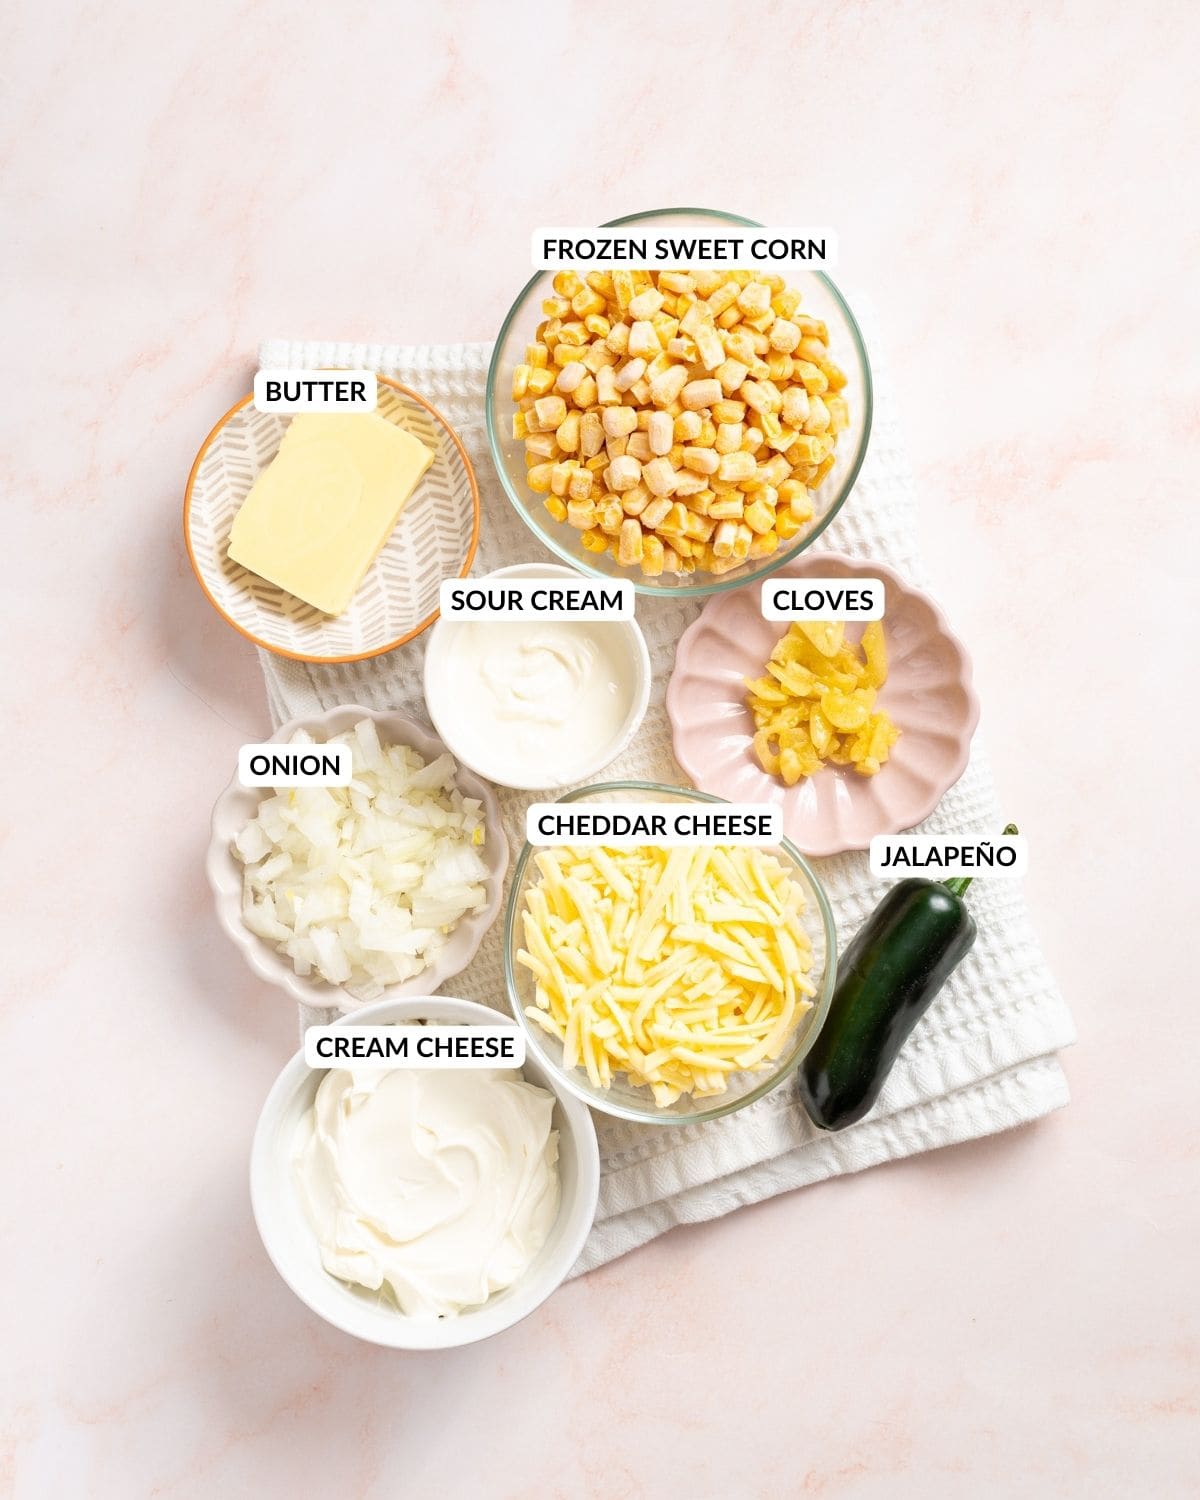 An image of the ingredients of jalapeno corn: sweet corn, jalapenos, sour cream, cream cheese, cheddar cheese, butter, garlic cloves, and onions in separate containers with labels.